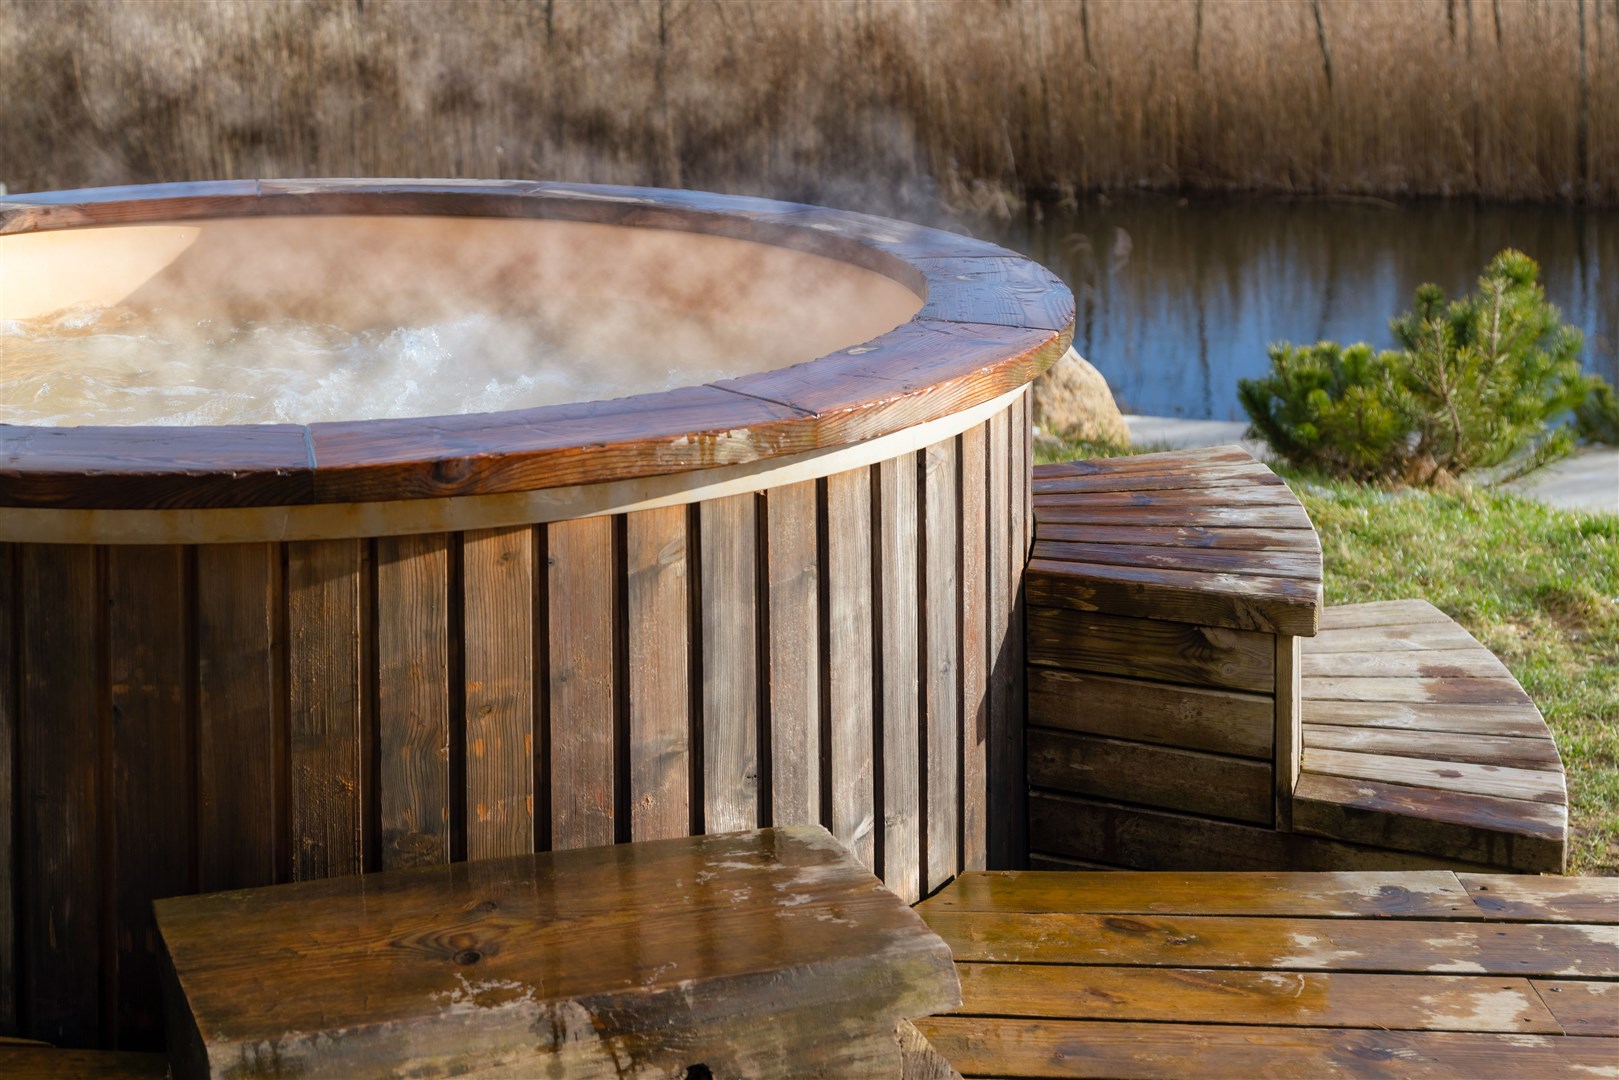 Short-term let owners must take reasonable steps to prevent noisy guests from using hot tubs after 10pm.